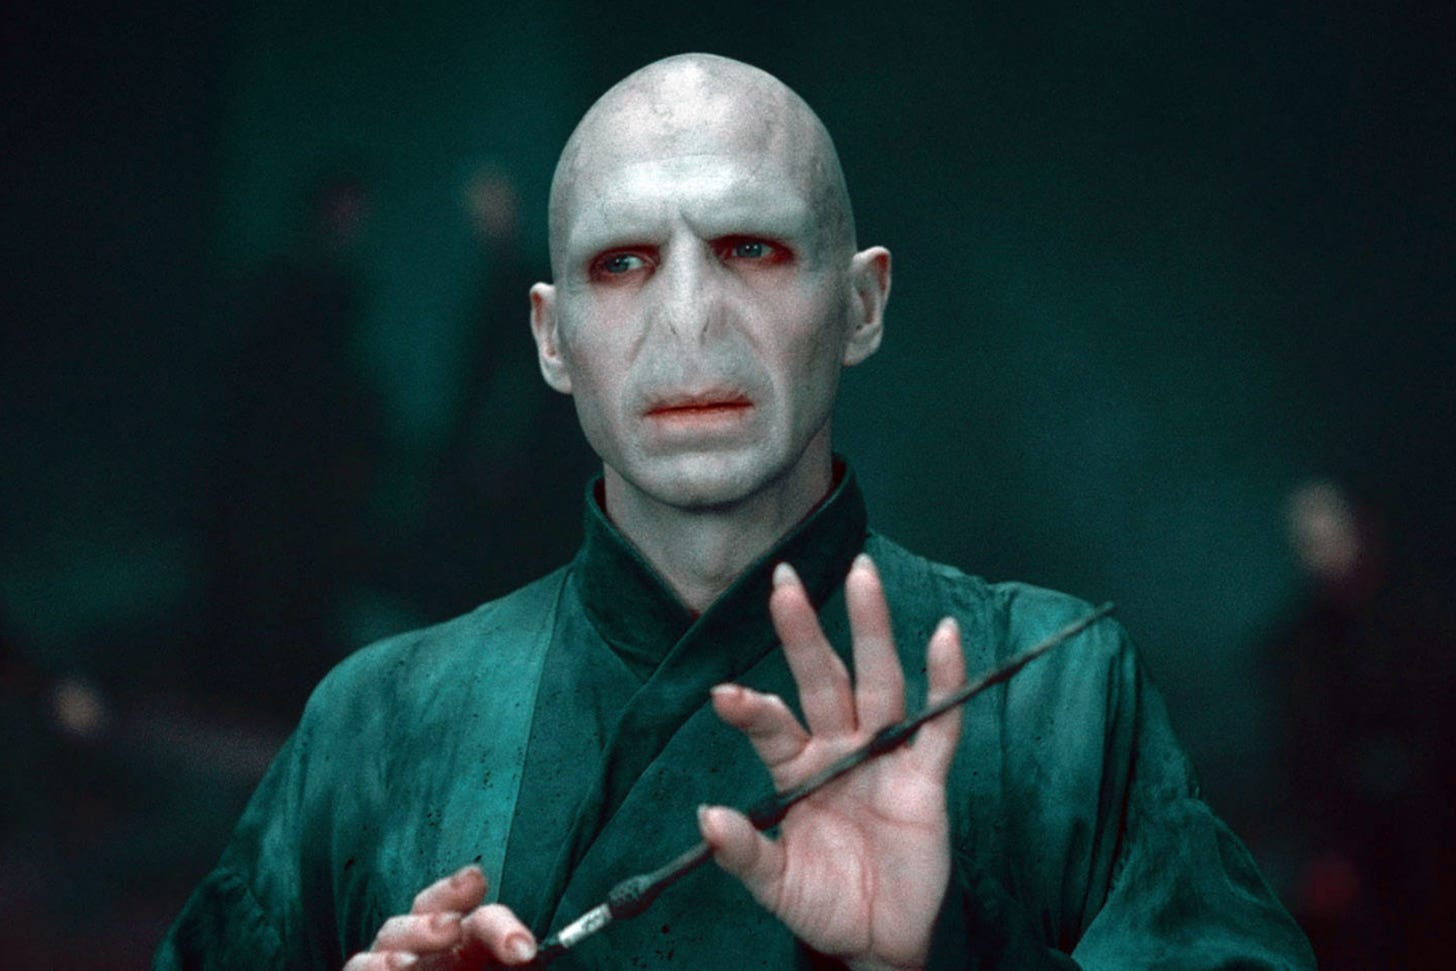 Harry Potter alum Ralph Fiennes would play Voldemort again | EW.com